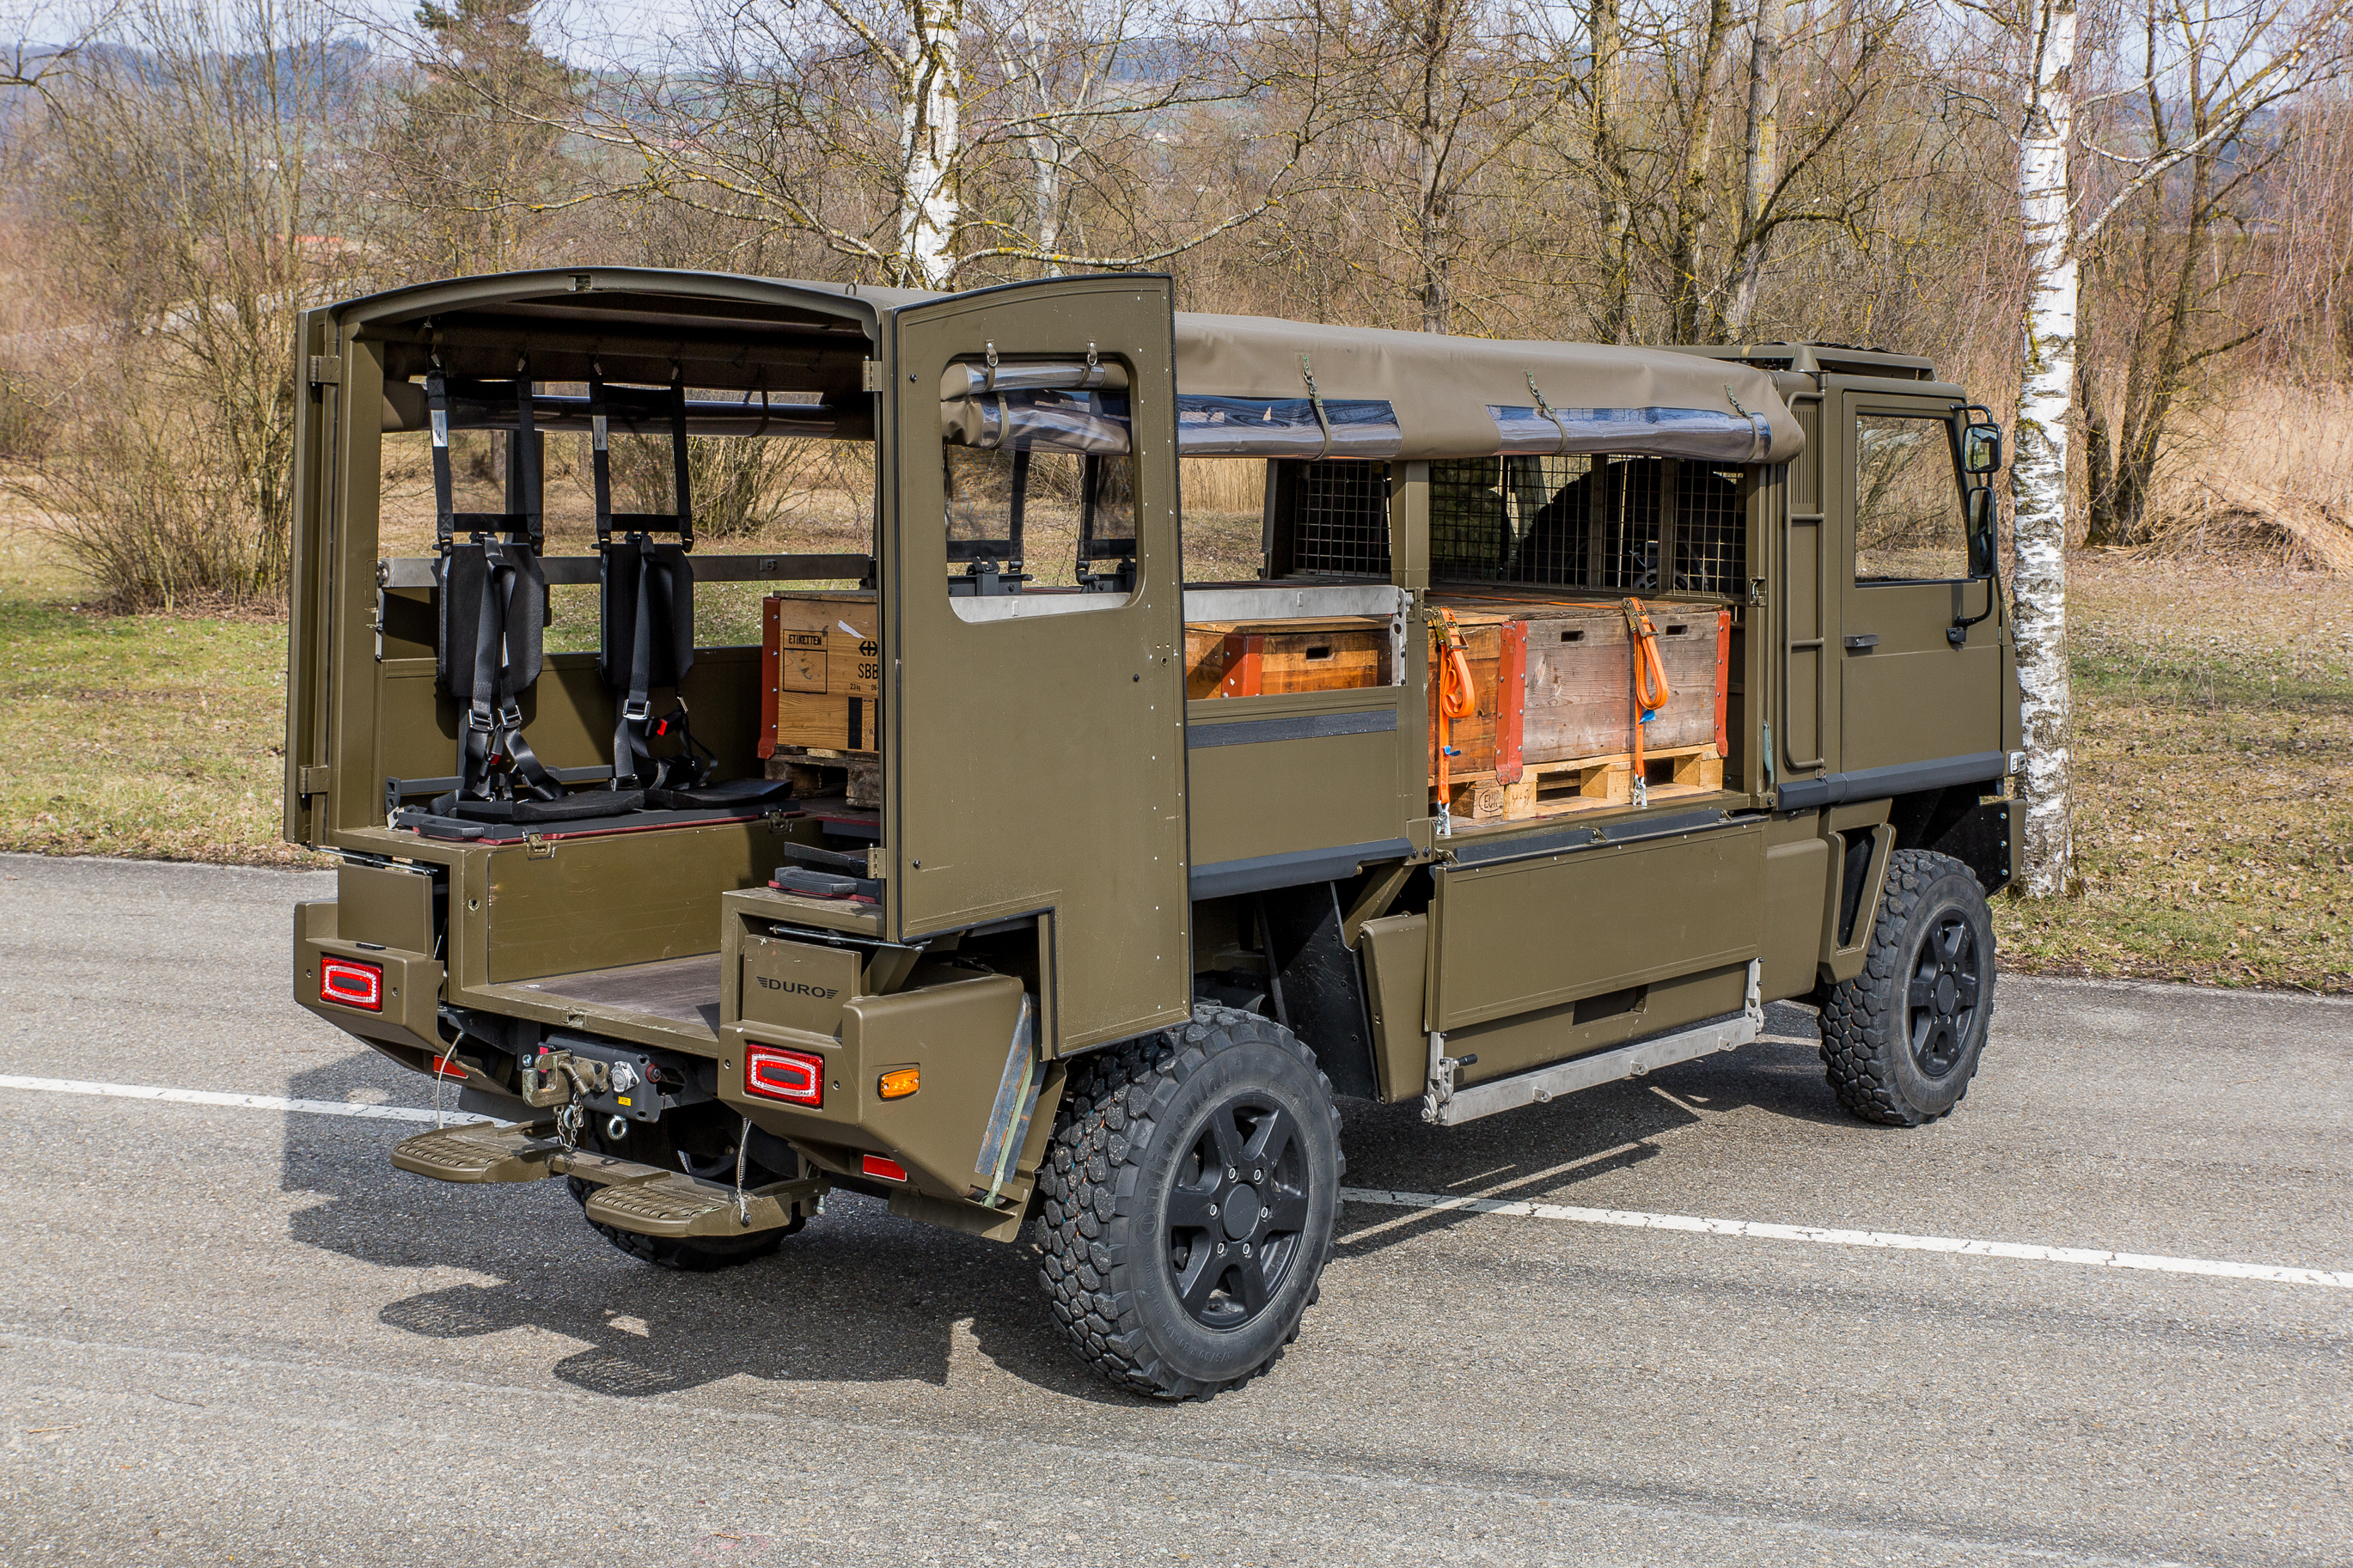 Swiss Army to Receive 219 Re-Engined Duro 4x4s with F1C Turbo-Diesel Engines